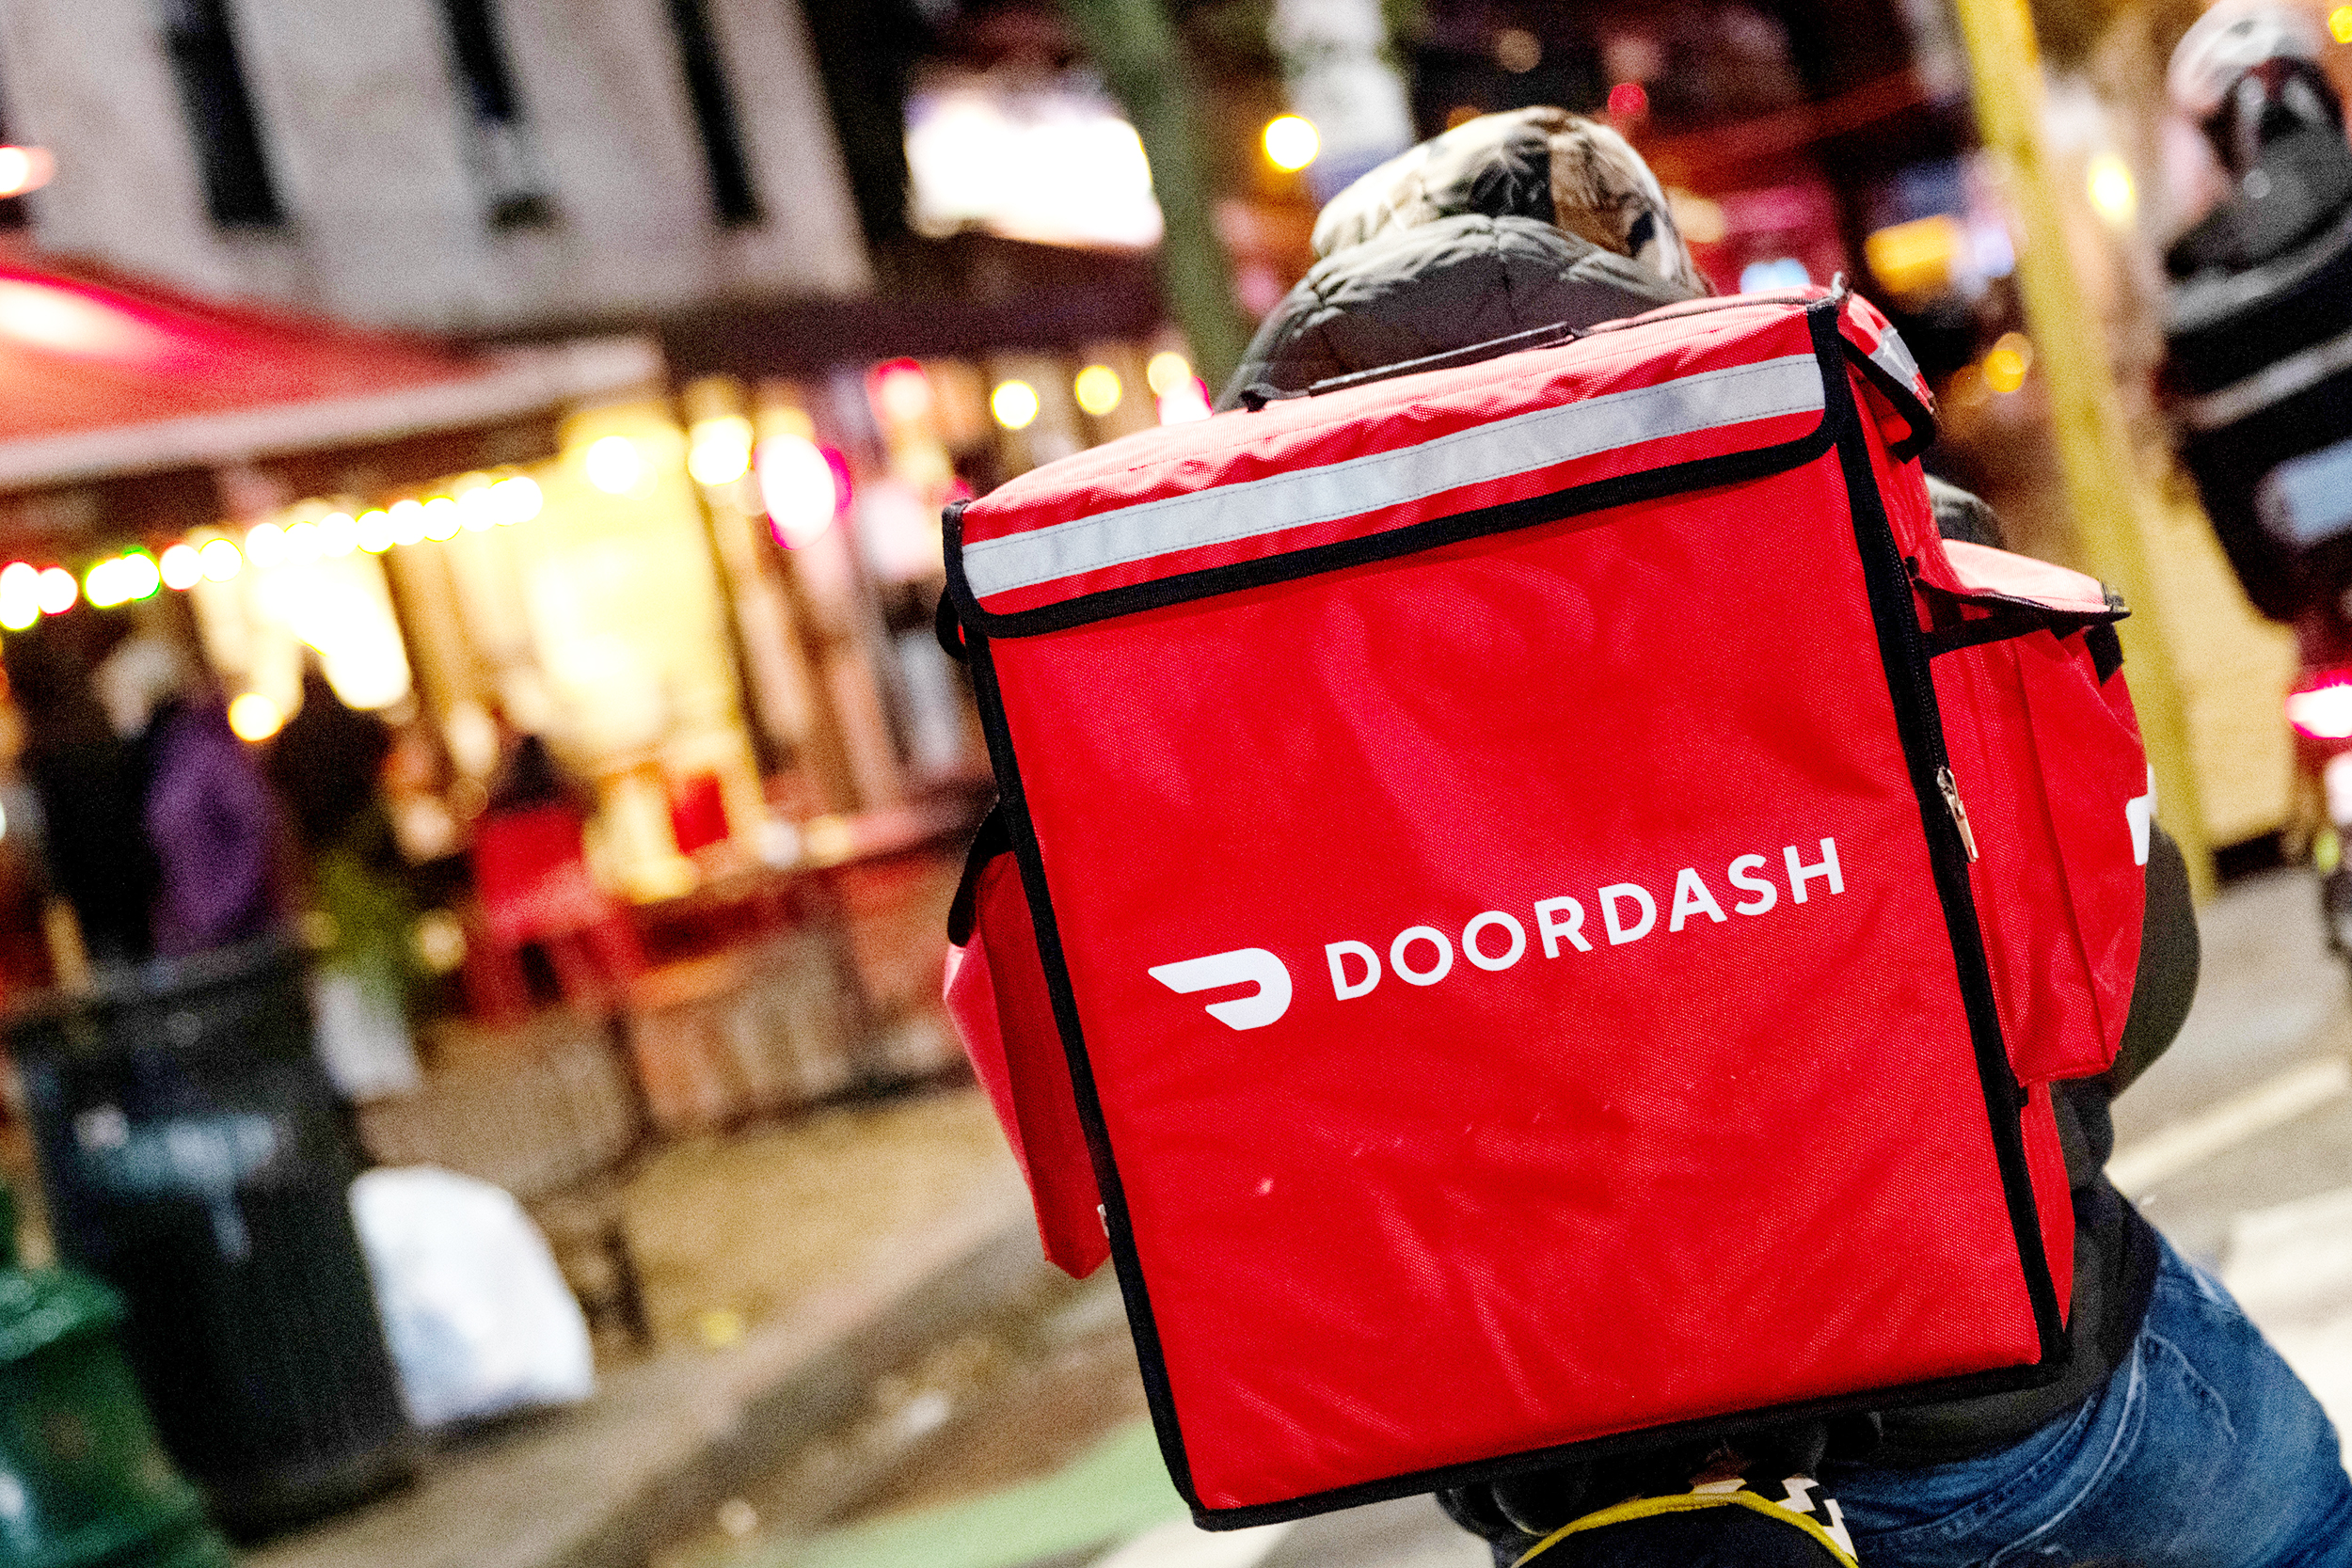 DoorDash warns not tipping on orders might make it take longer to deliver